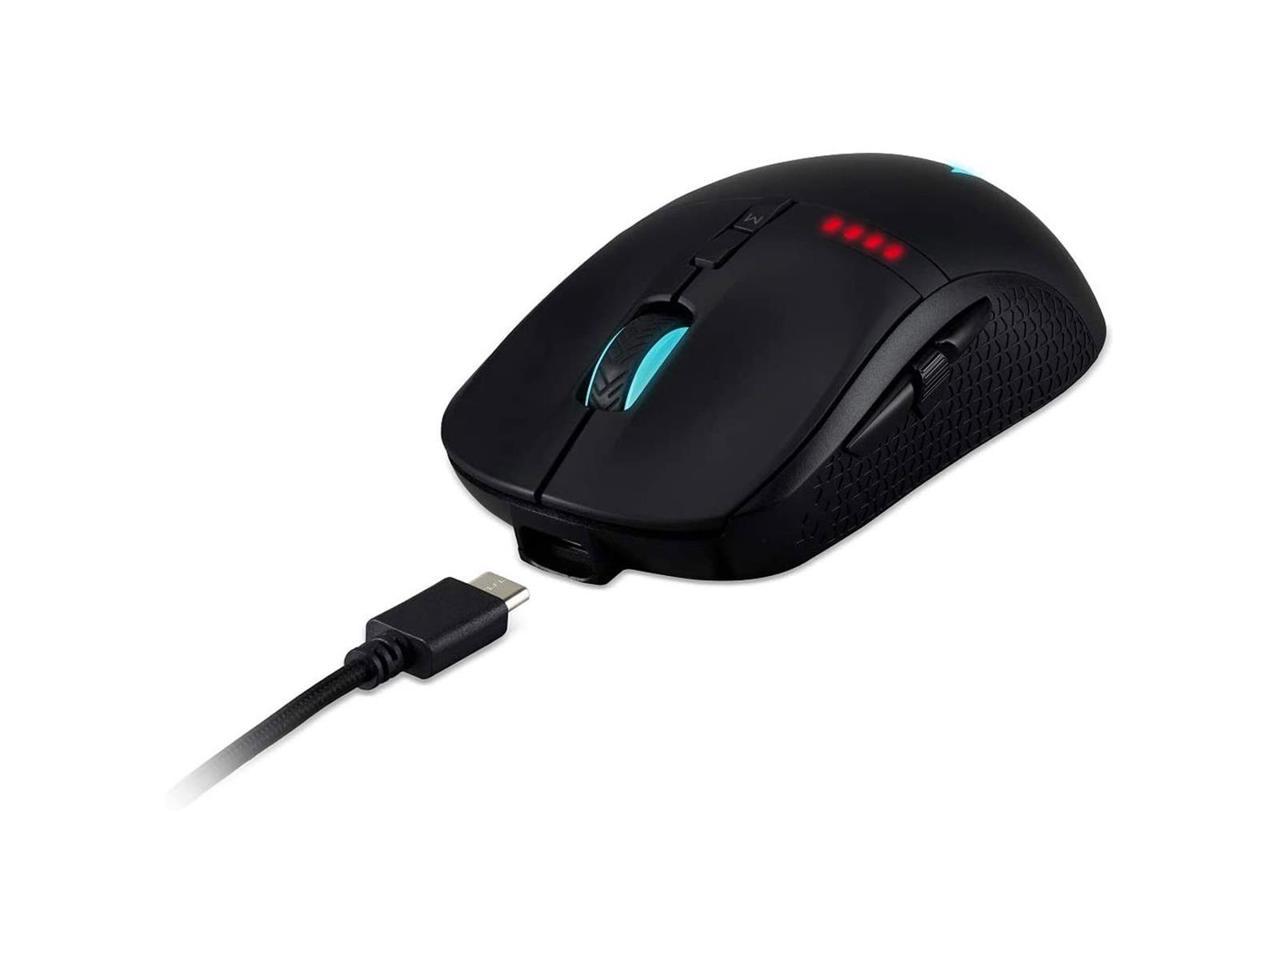 Acer Predator Cestus 350 Wired Gaming Mouse, Black #GP.MCE11.00Q - image 2 of 10